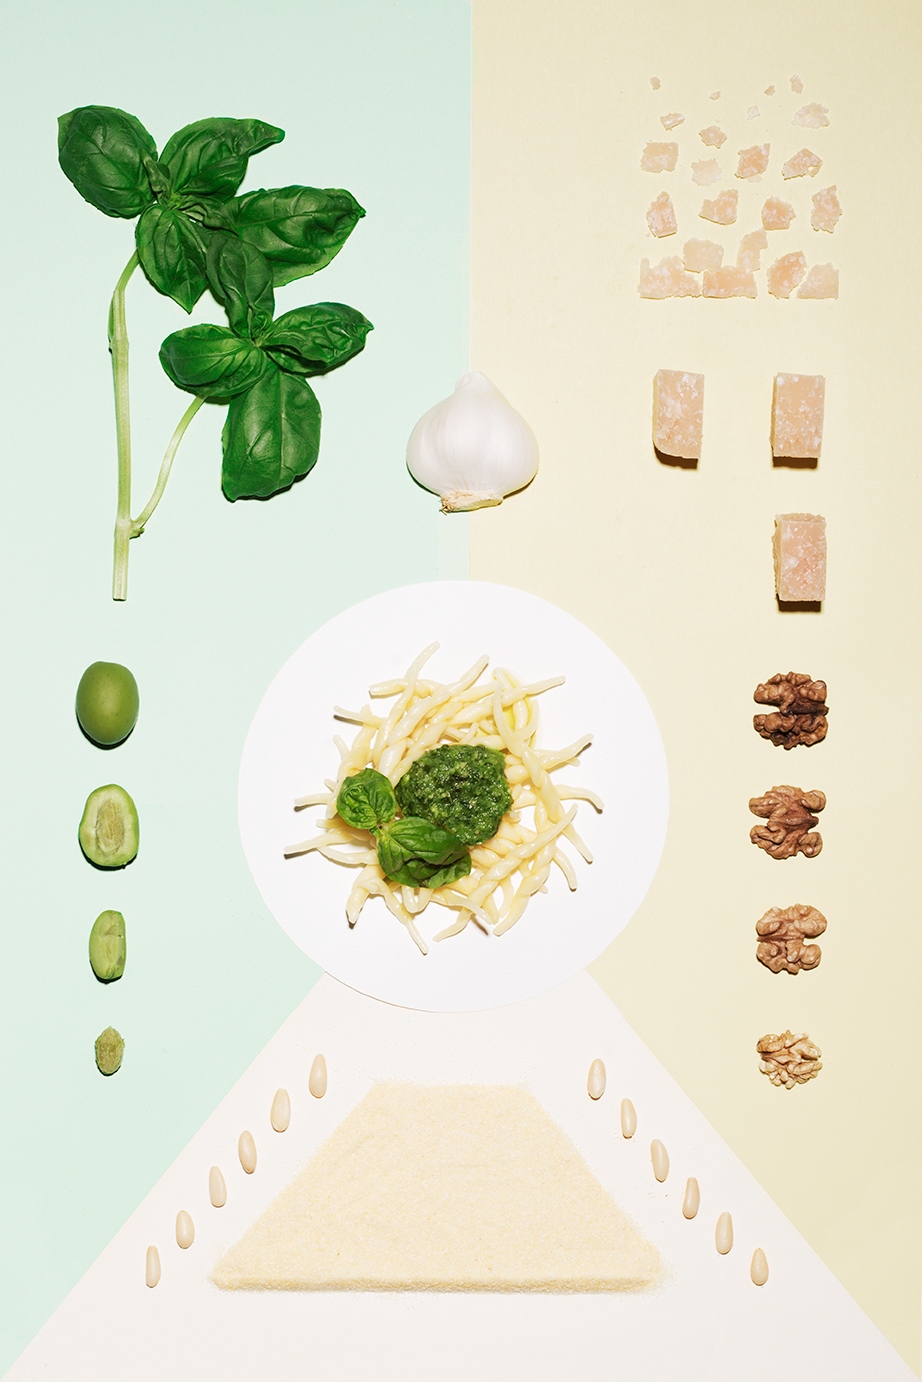 deconstruct Food  geometry ingredients colors organized neatly